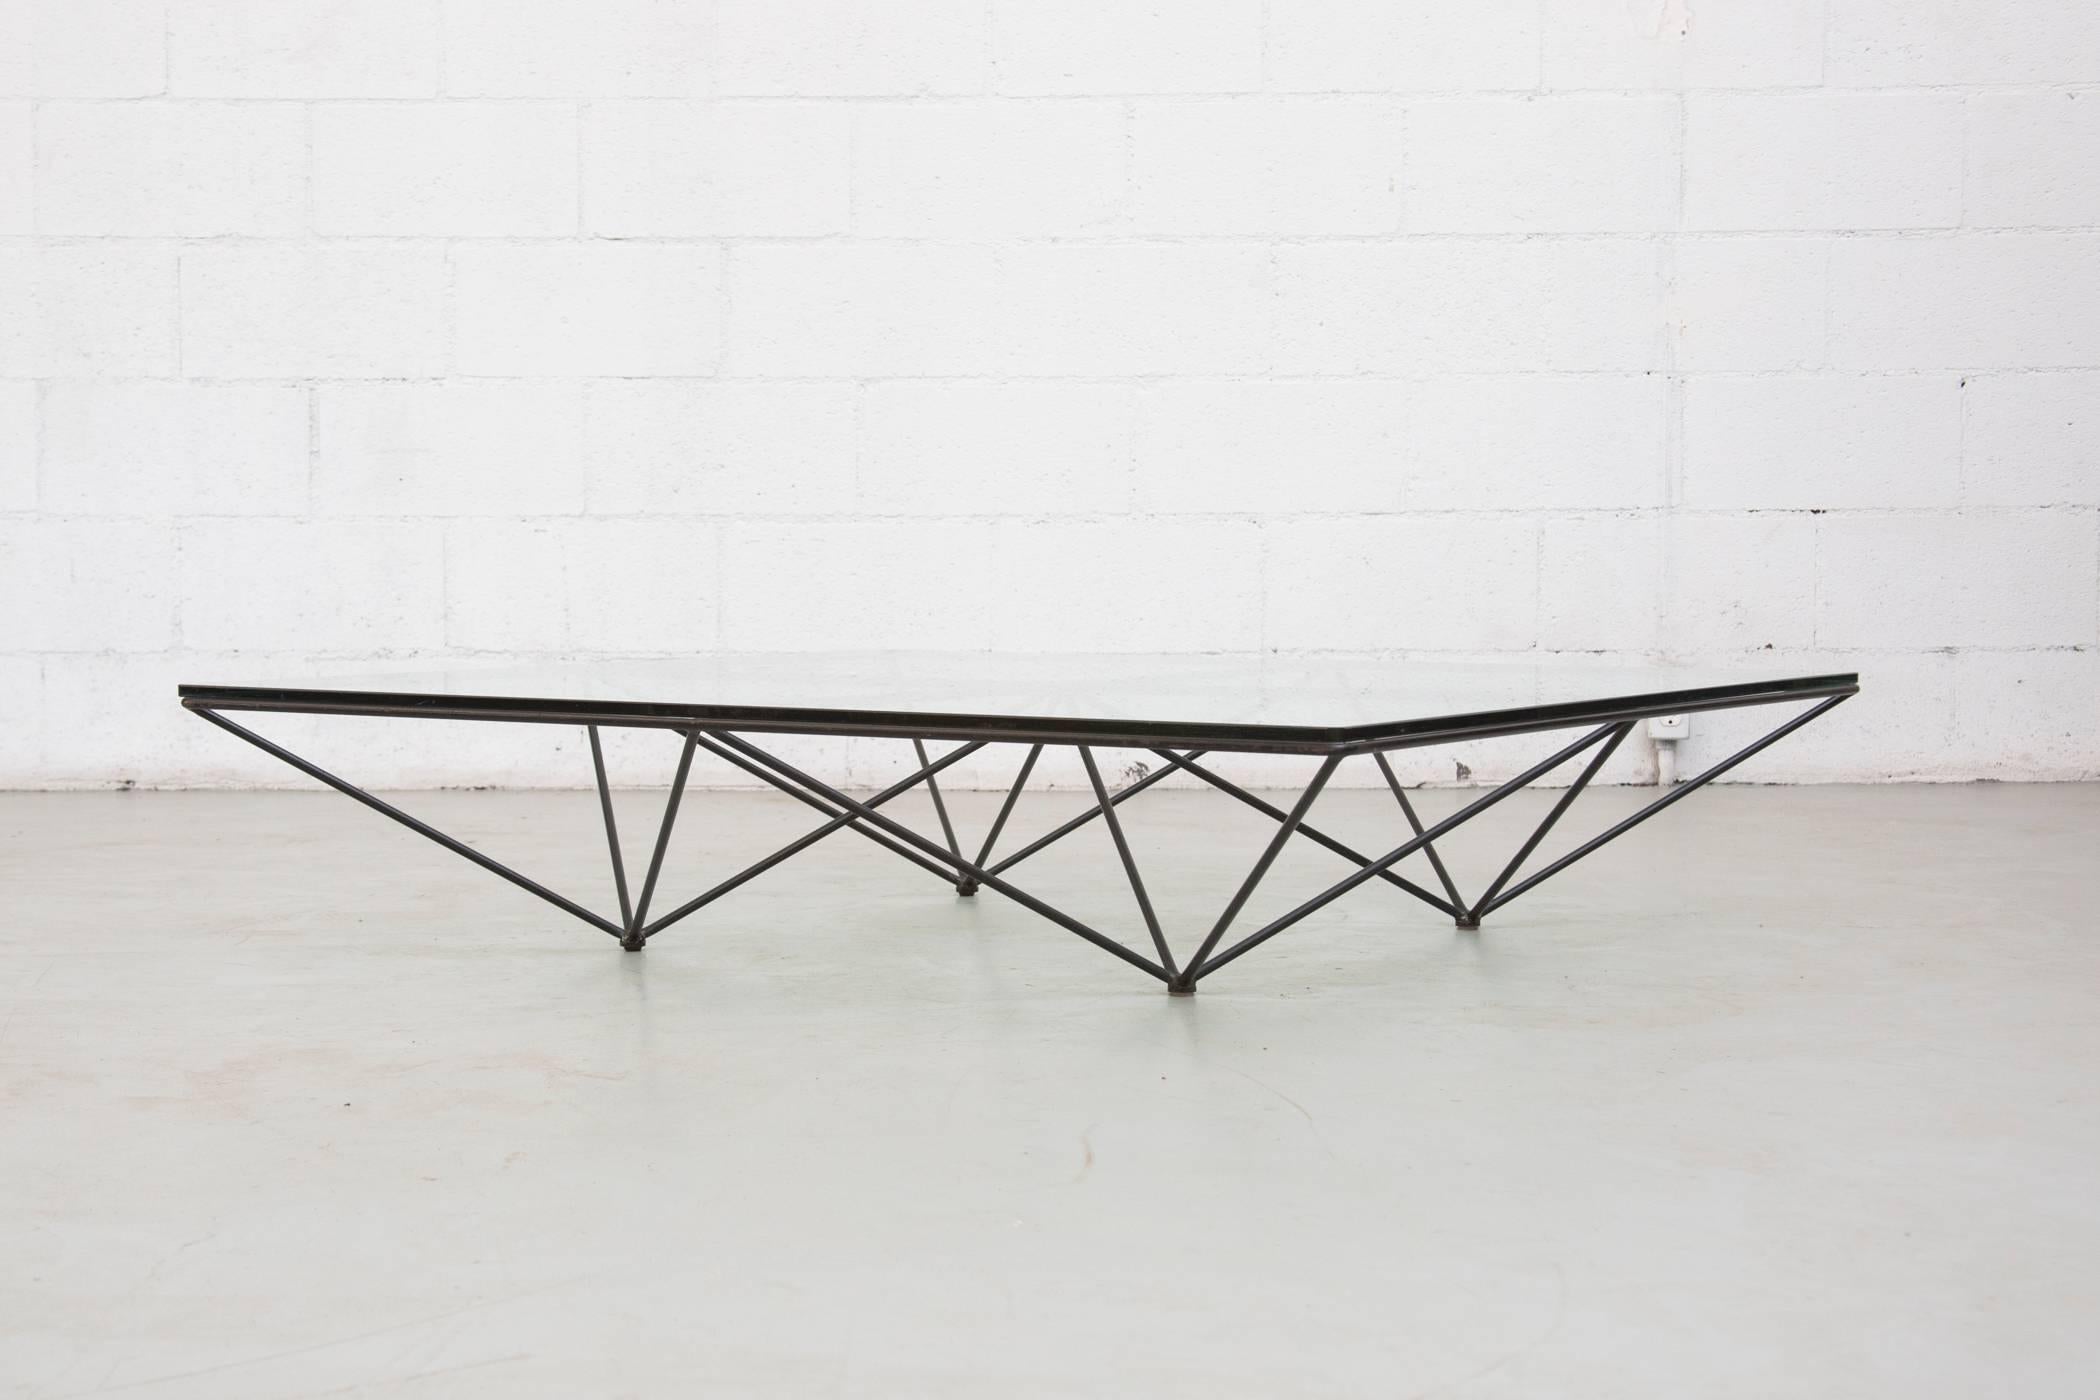 Architectural coffee table in the style of the 